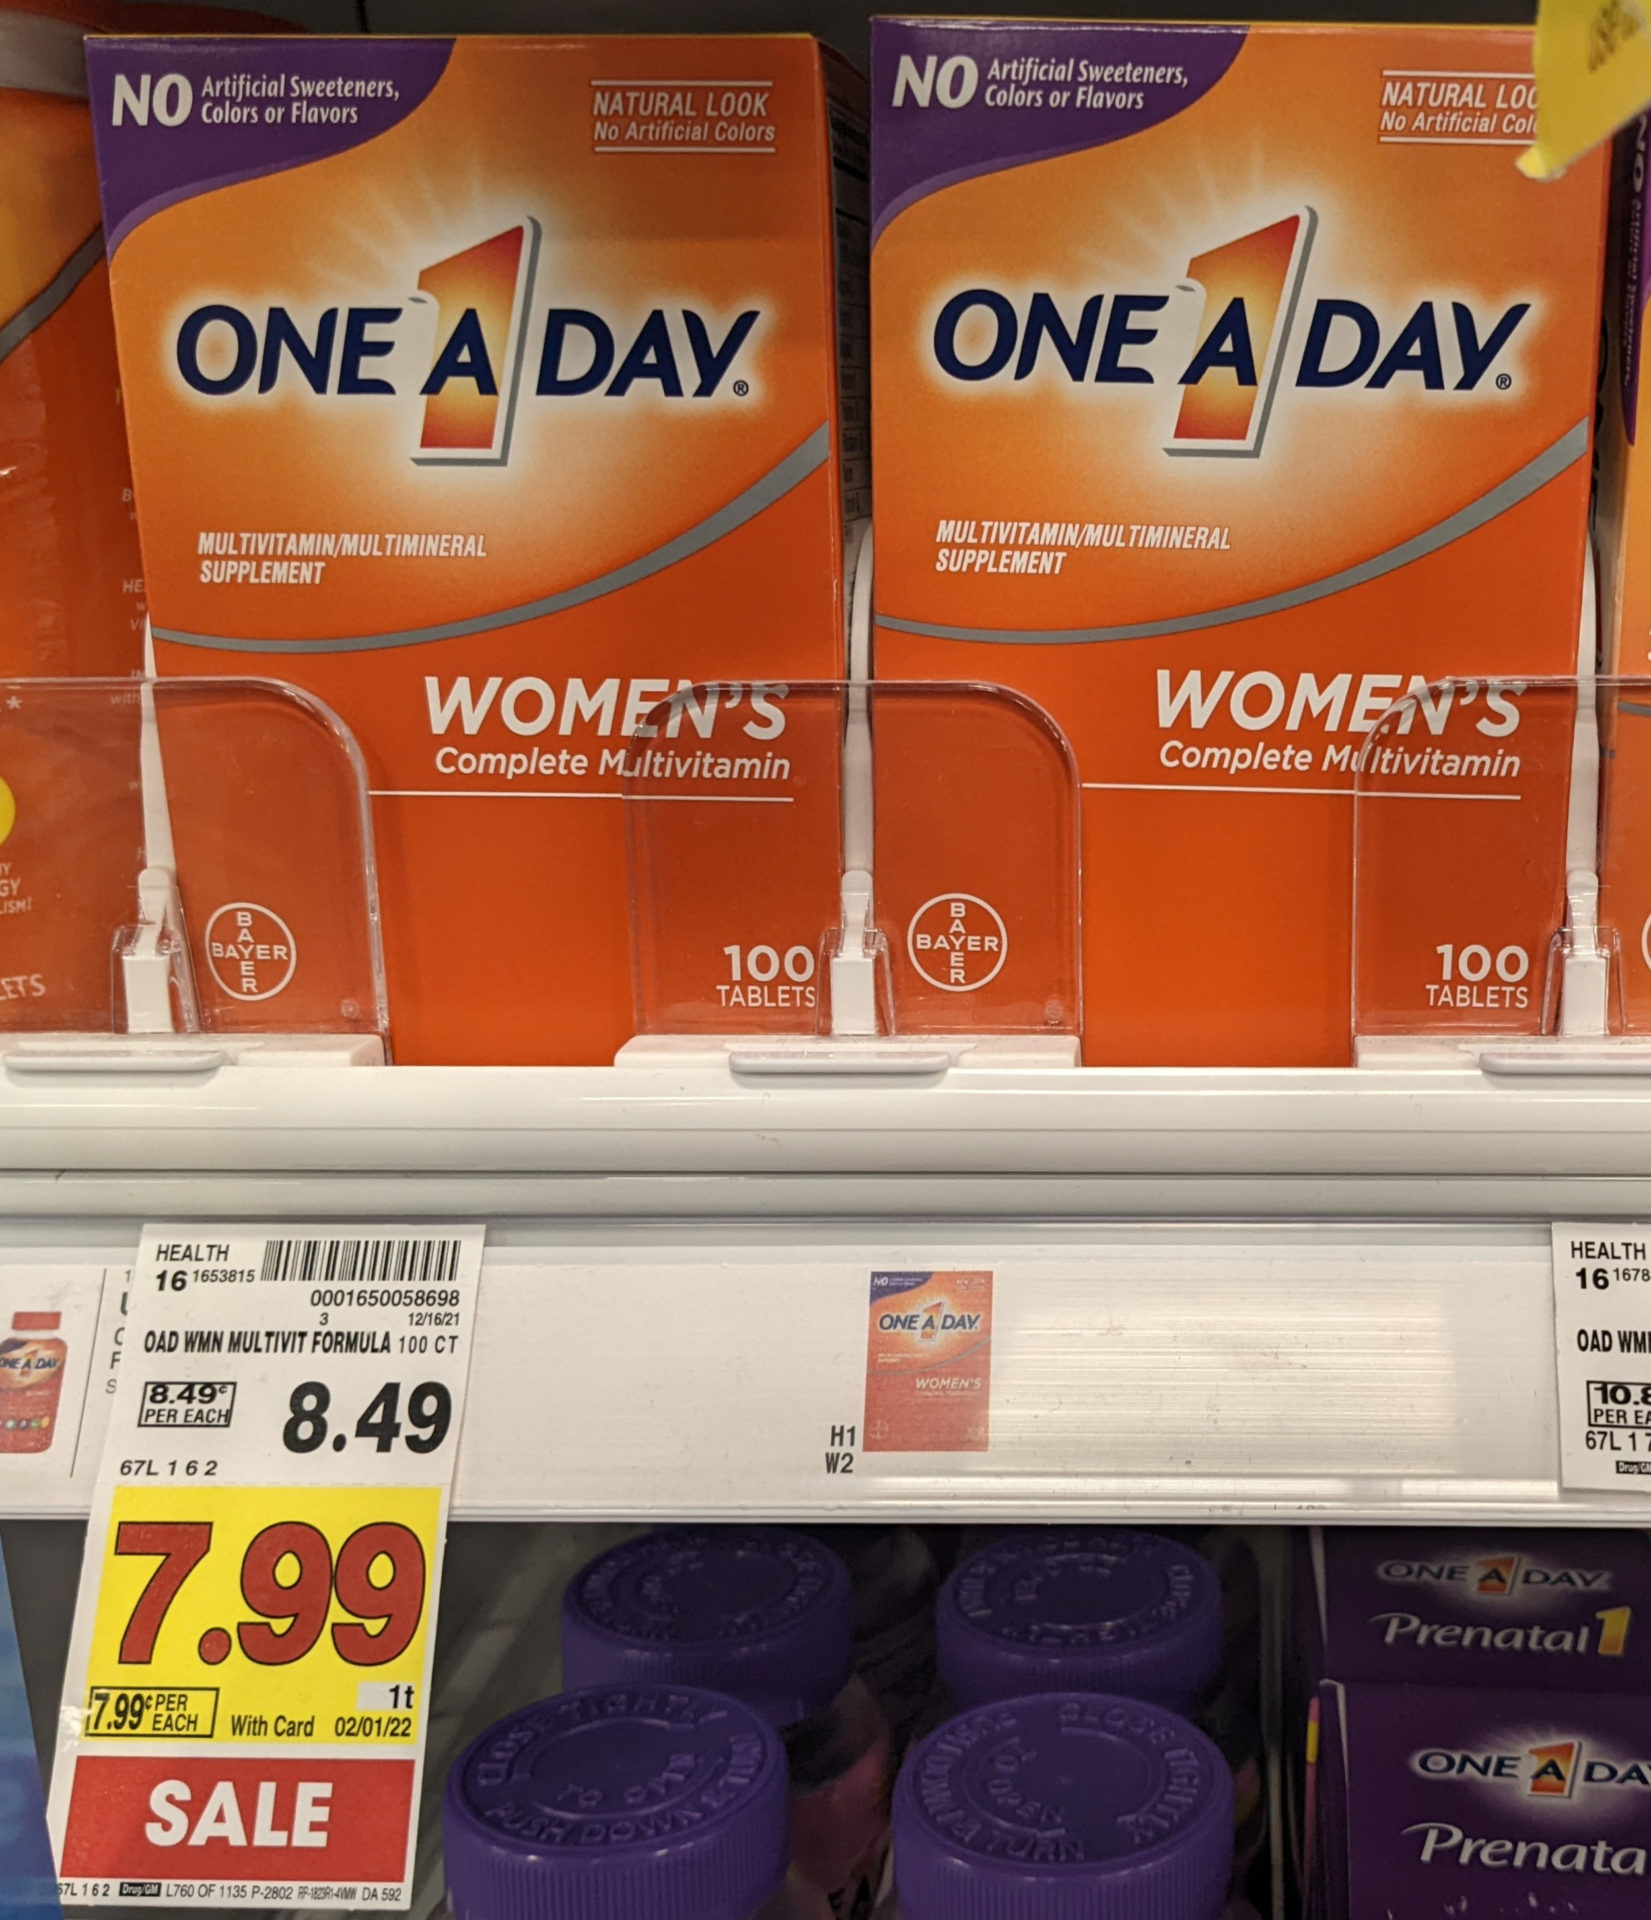 One A Day Vitamins As Low As $3.99 At Kroger 1